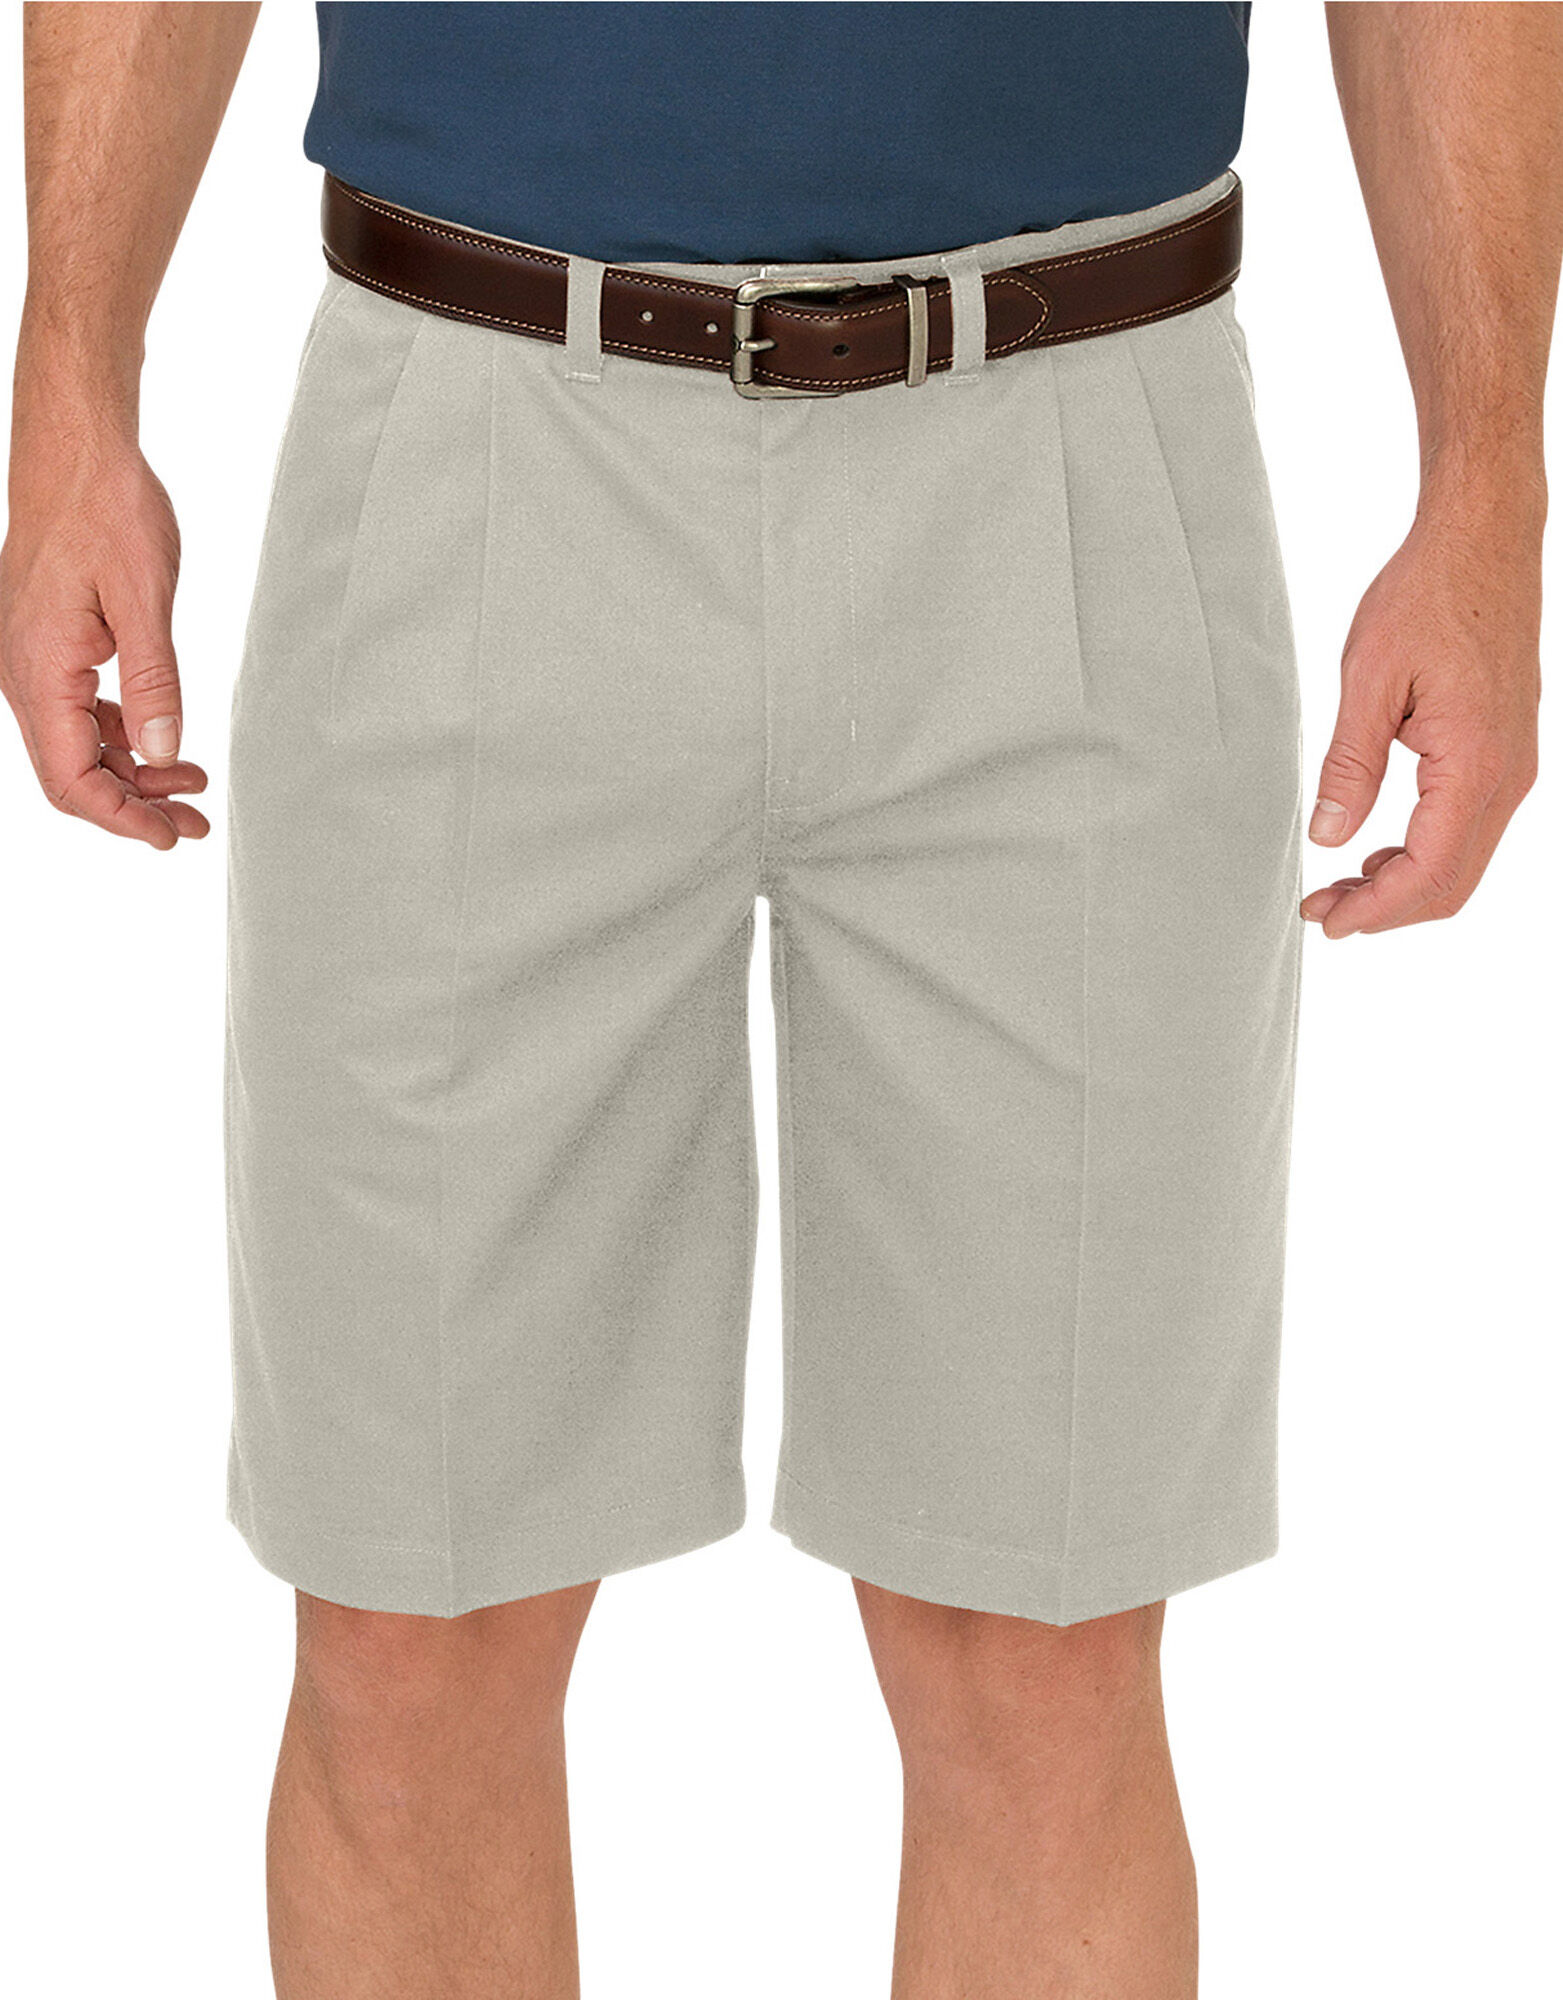 Men's Khaki Shorts | Pleated, Relaxed Fit | Dickies